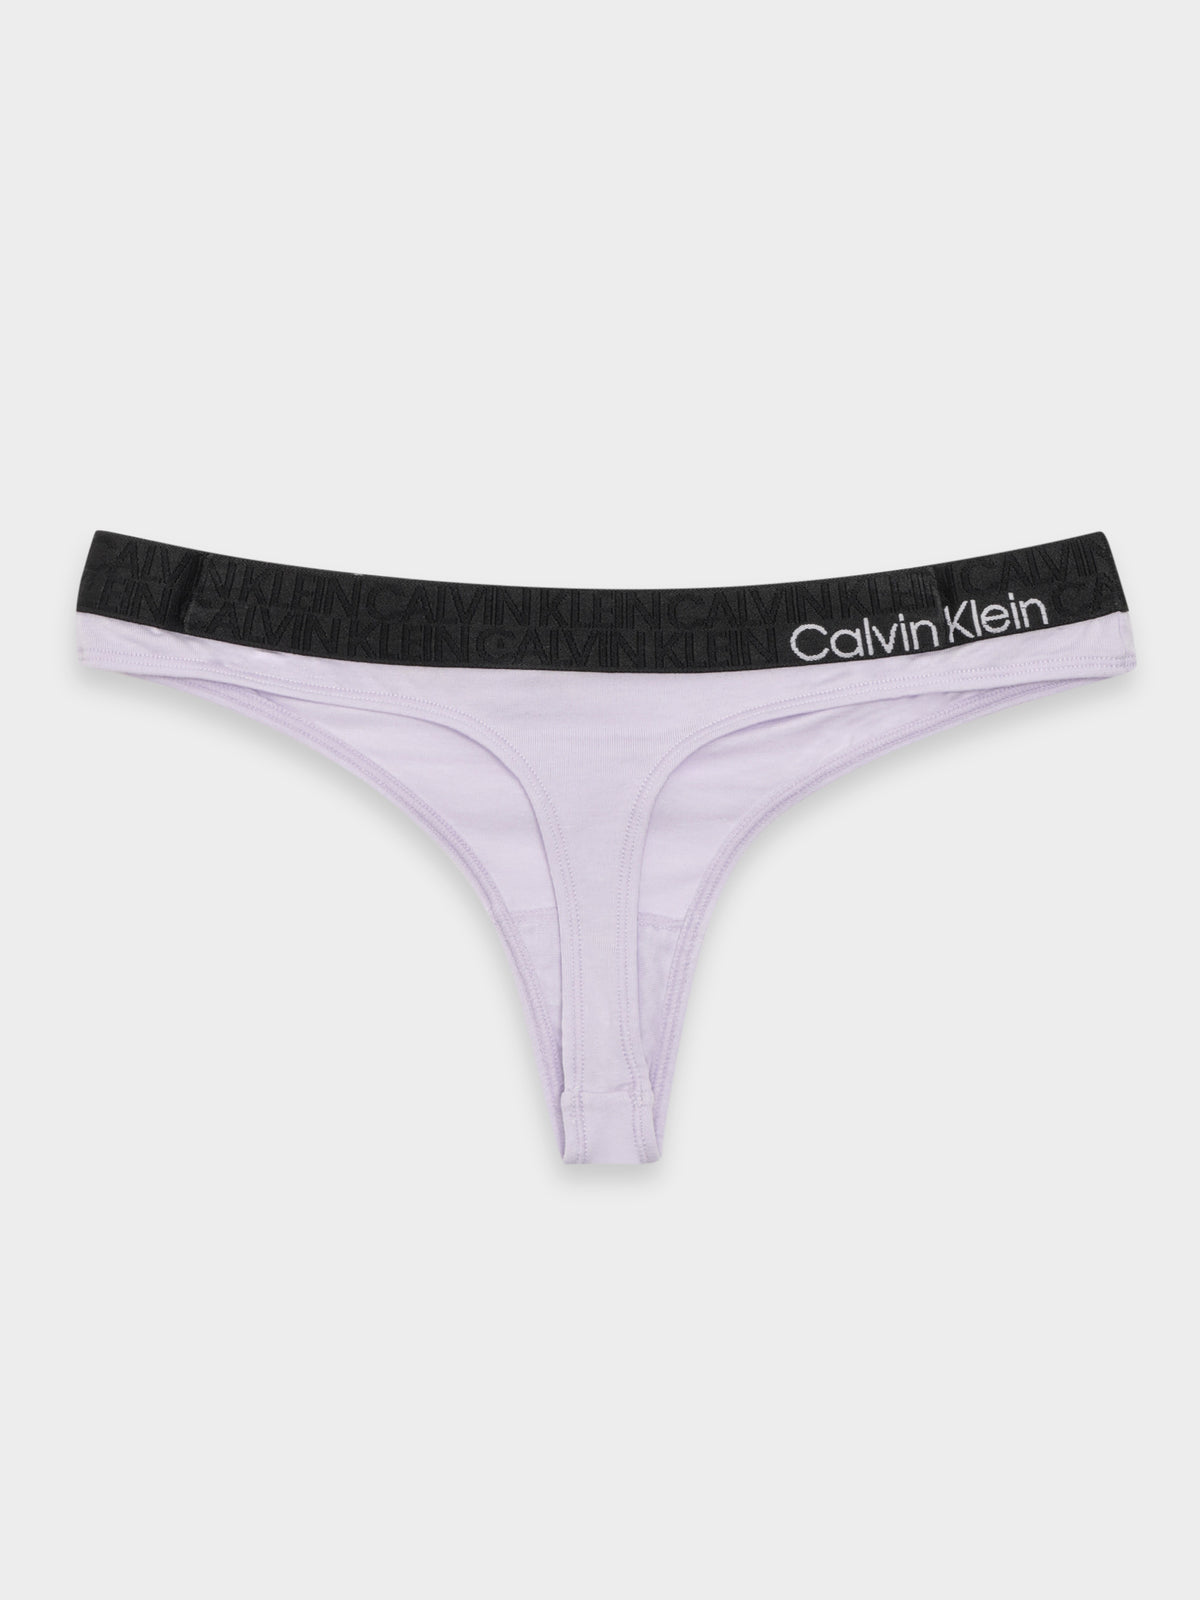 Reconsidered Comfort Thong in Ambient Lavender